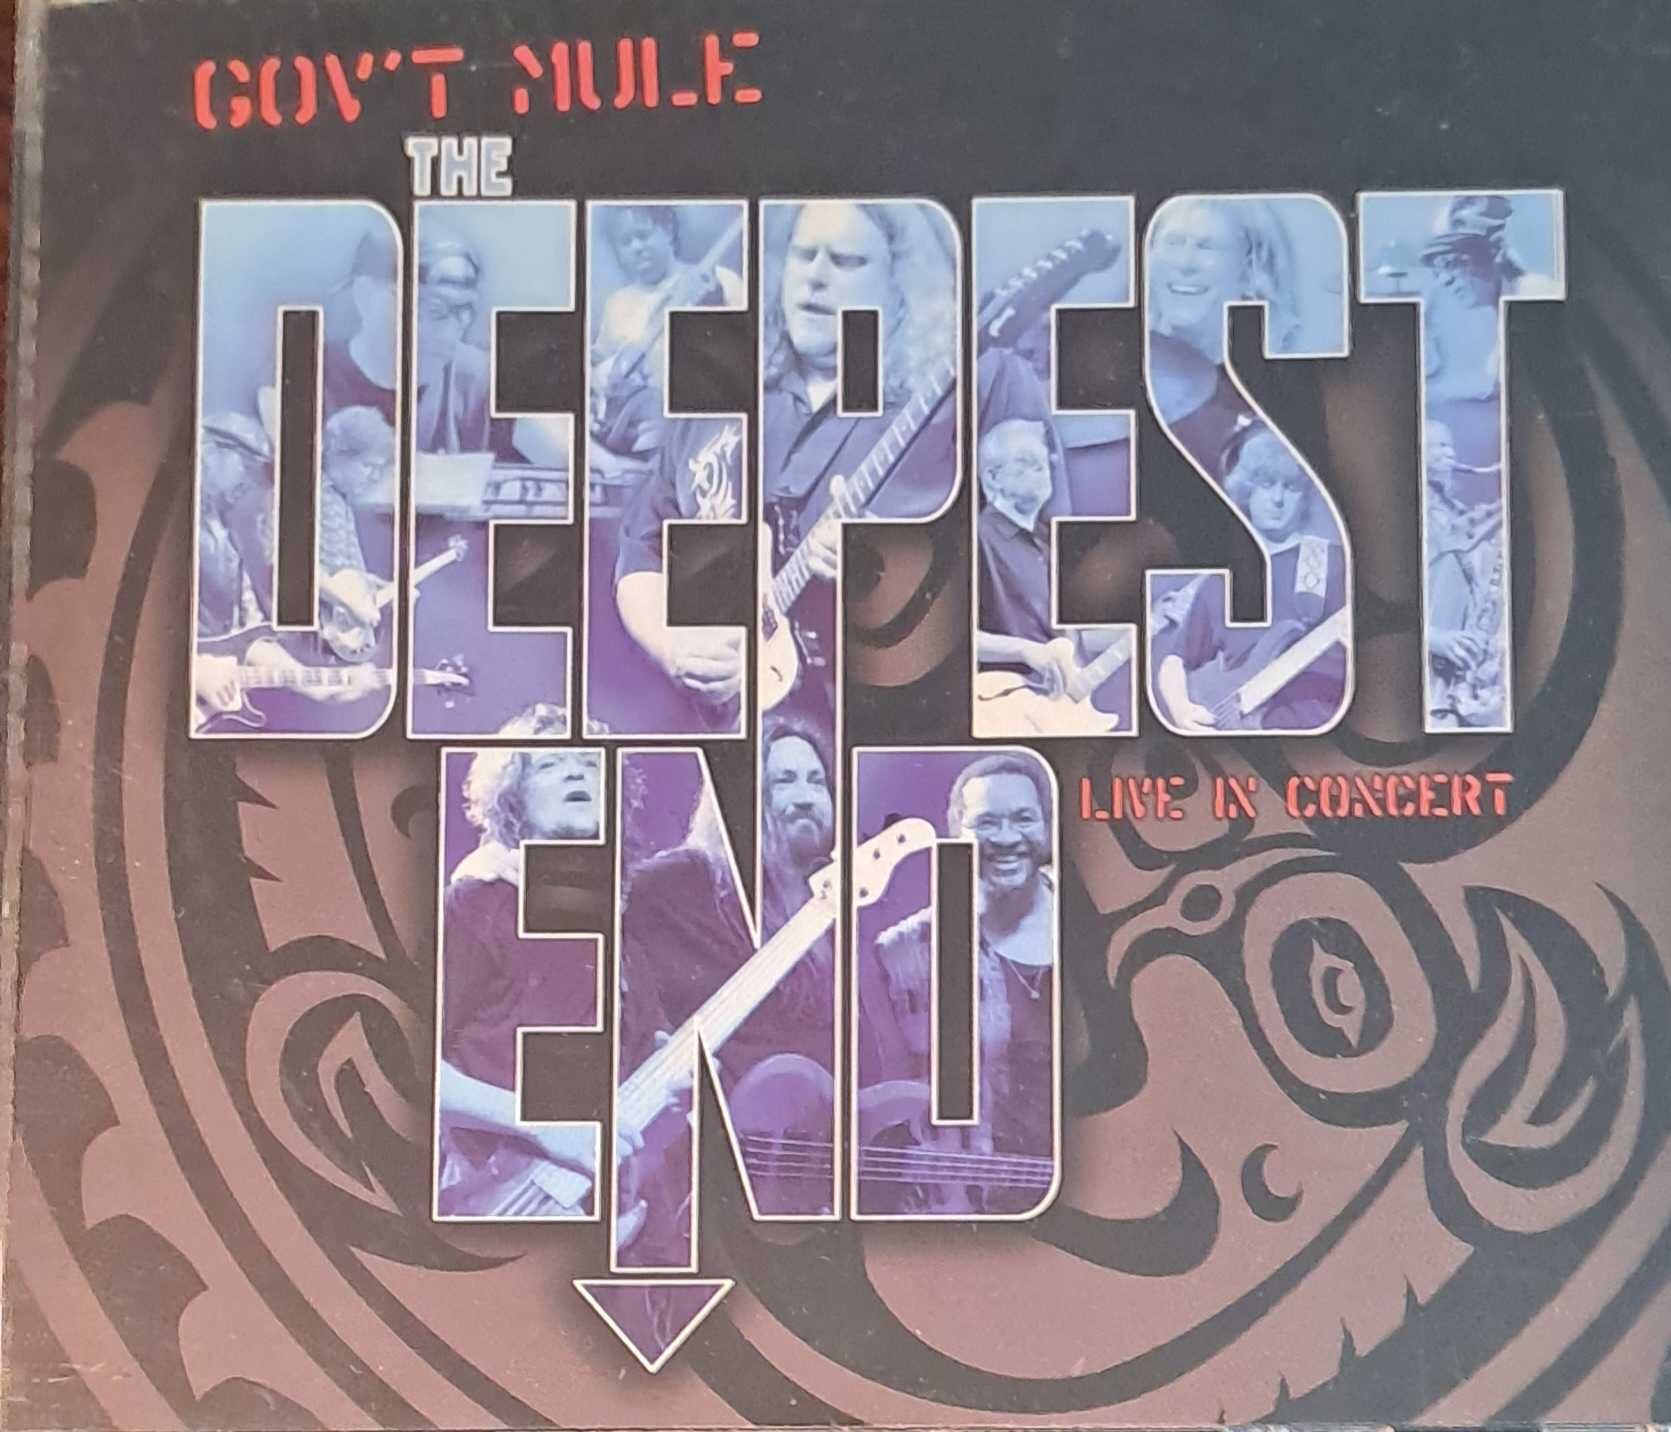 Gov't Mule - "The Deepest End". Live in concert